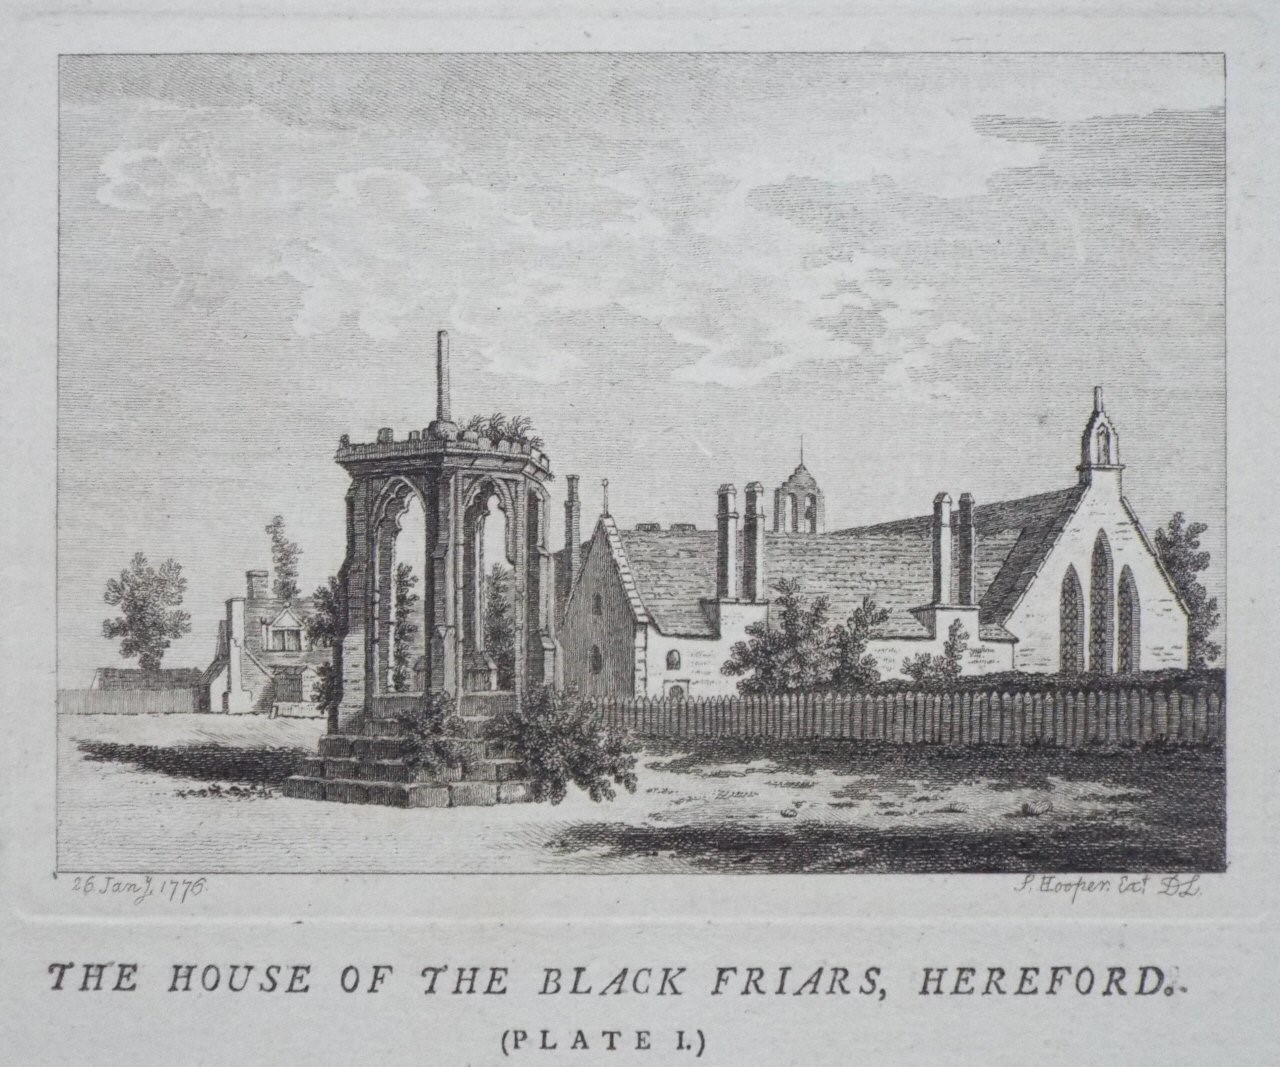 Print - The House of the Black Friars, Hereford. Plate I. - D